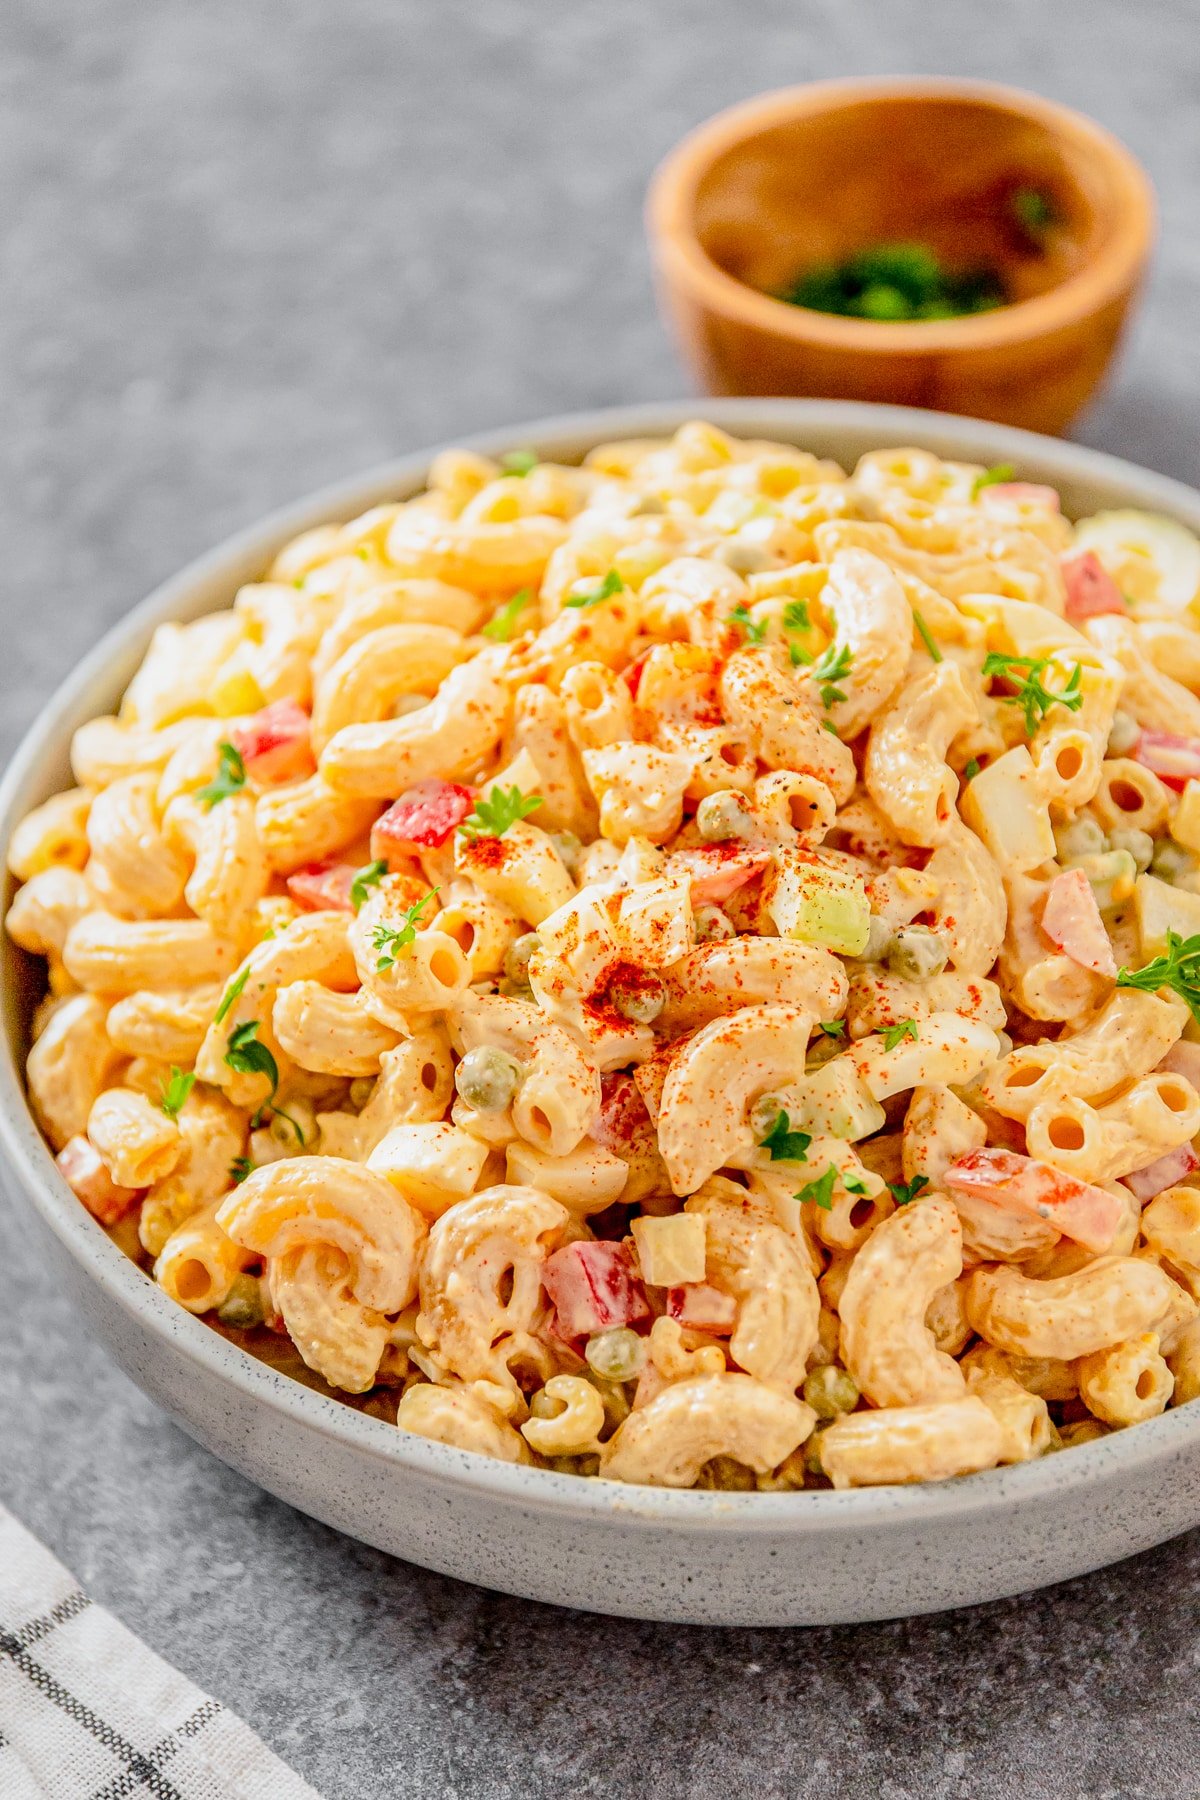 45 degree angle image of macaroni salad with peas in a grey bowl